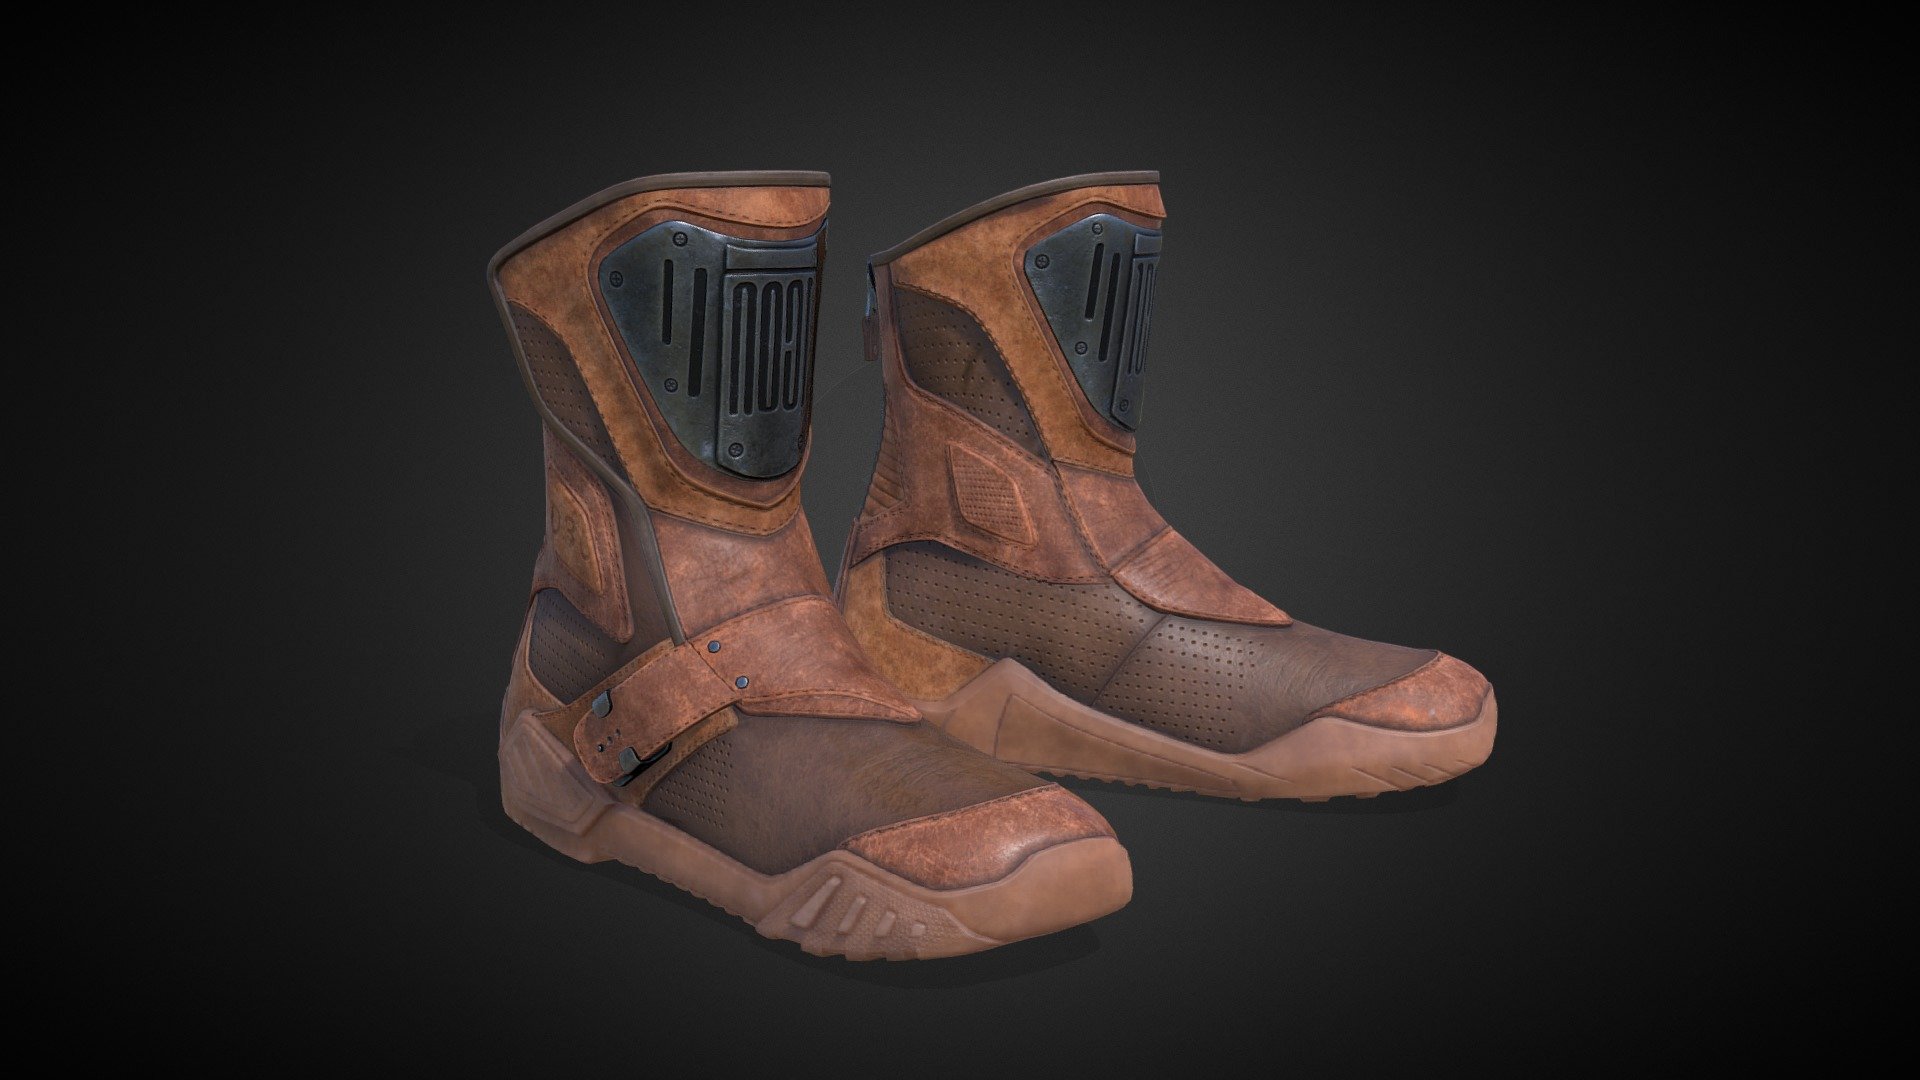 A pair of boots that I made in my spare time
Workflow: Blender, ZBrush, Marvelous Designer, Substance Painter.
Love C: - Motorcycle boots - 3D model by Eques_inferno 3d model